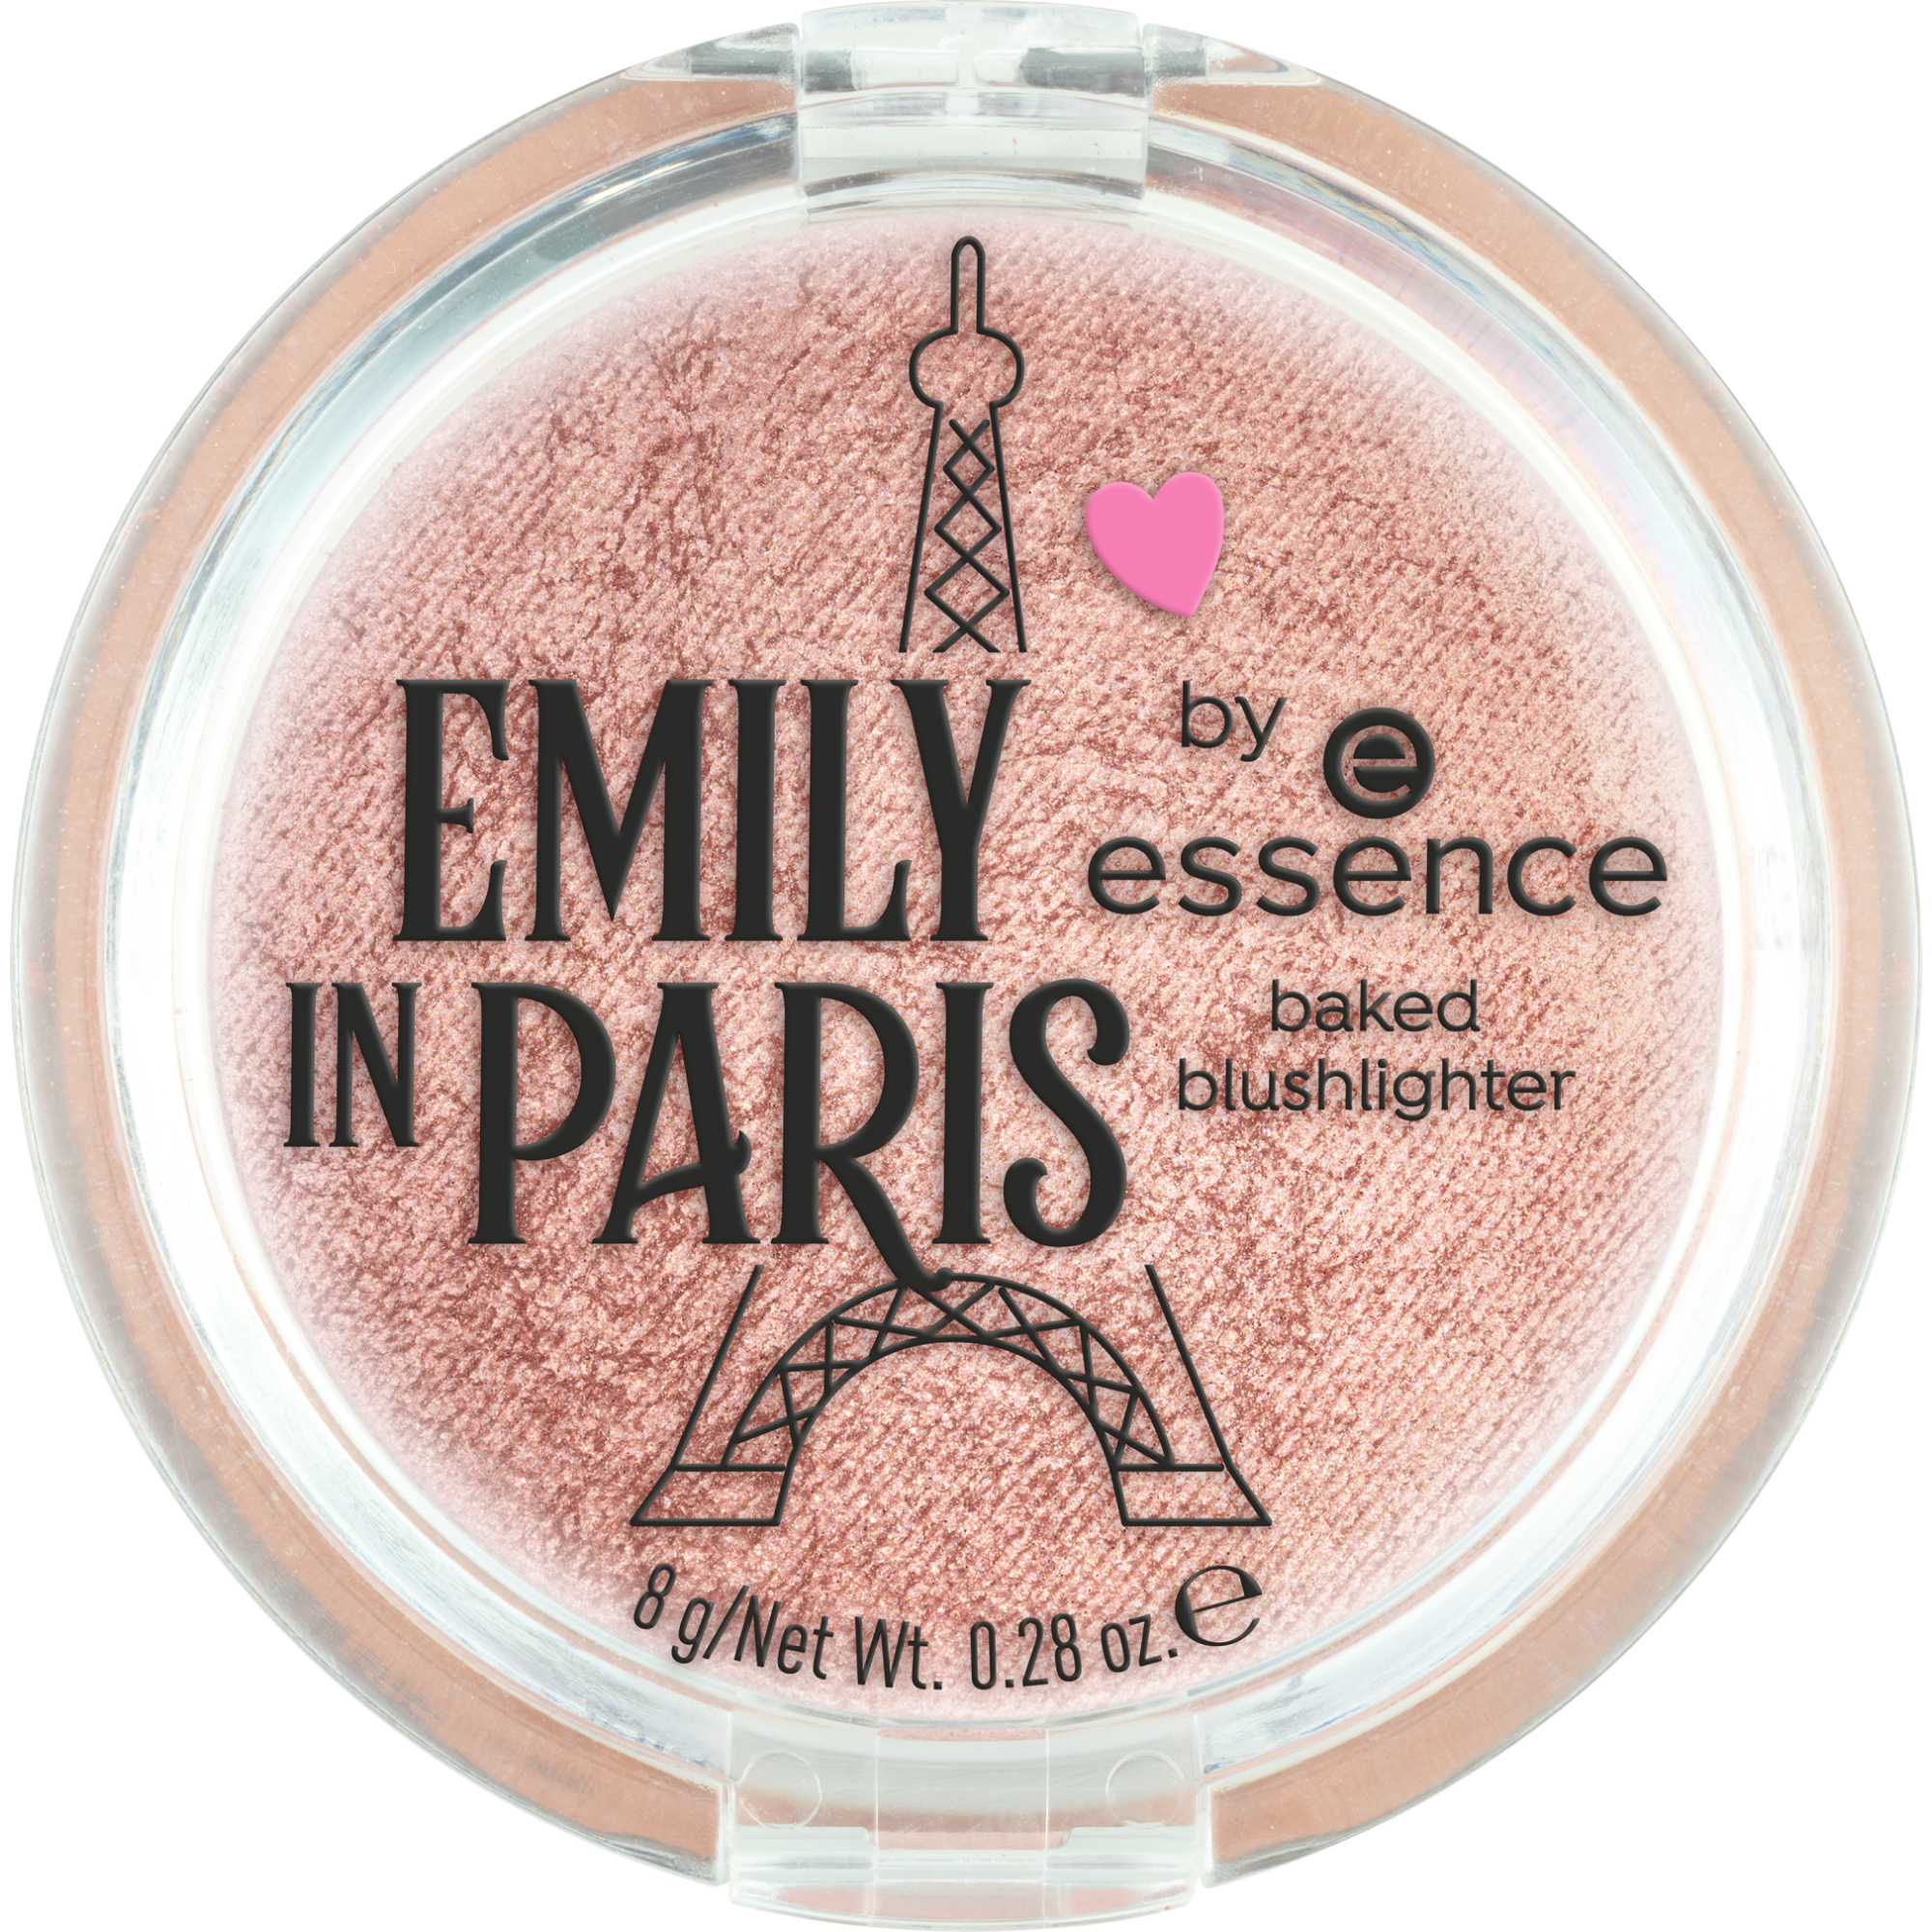 essence EMILY IN PARIS by essence baked blushlighter